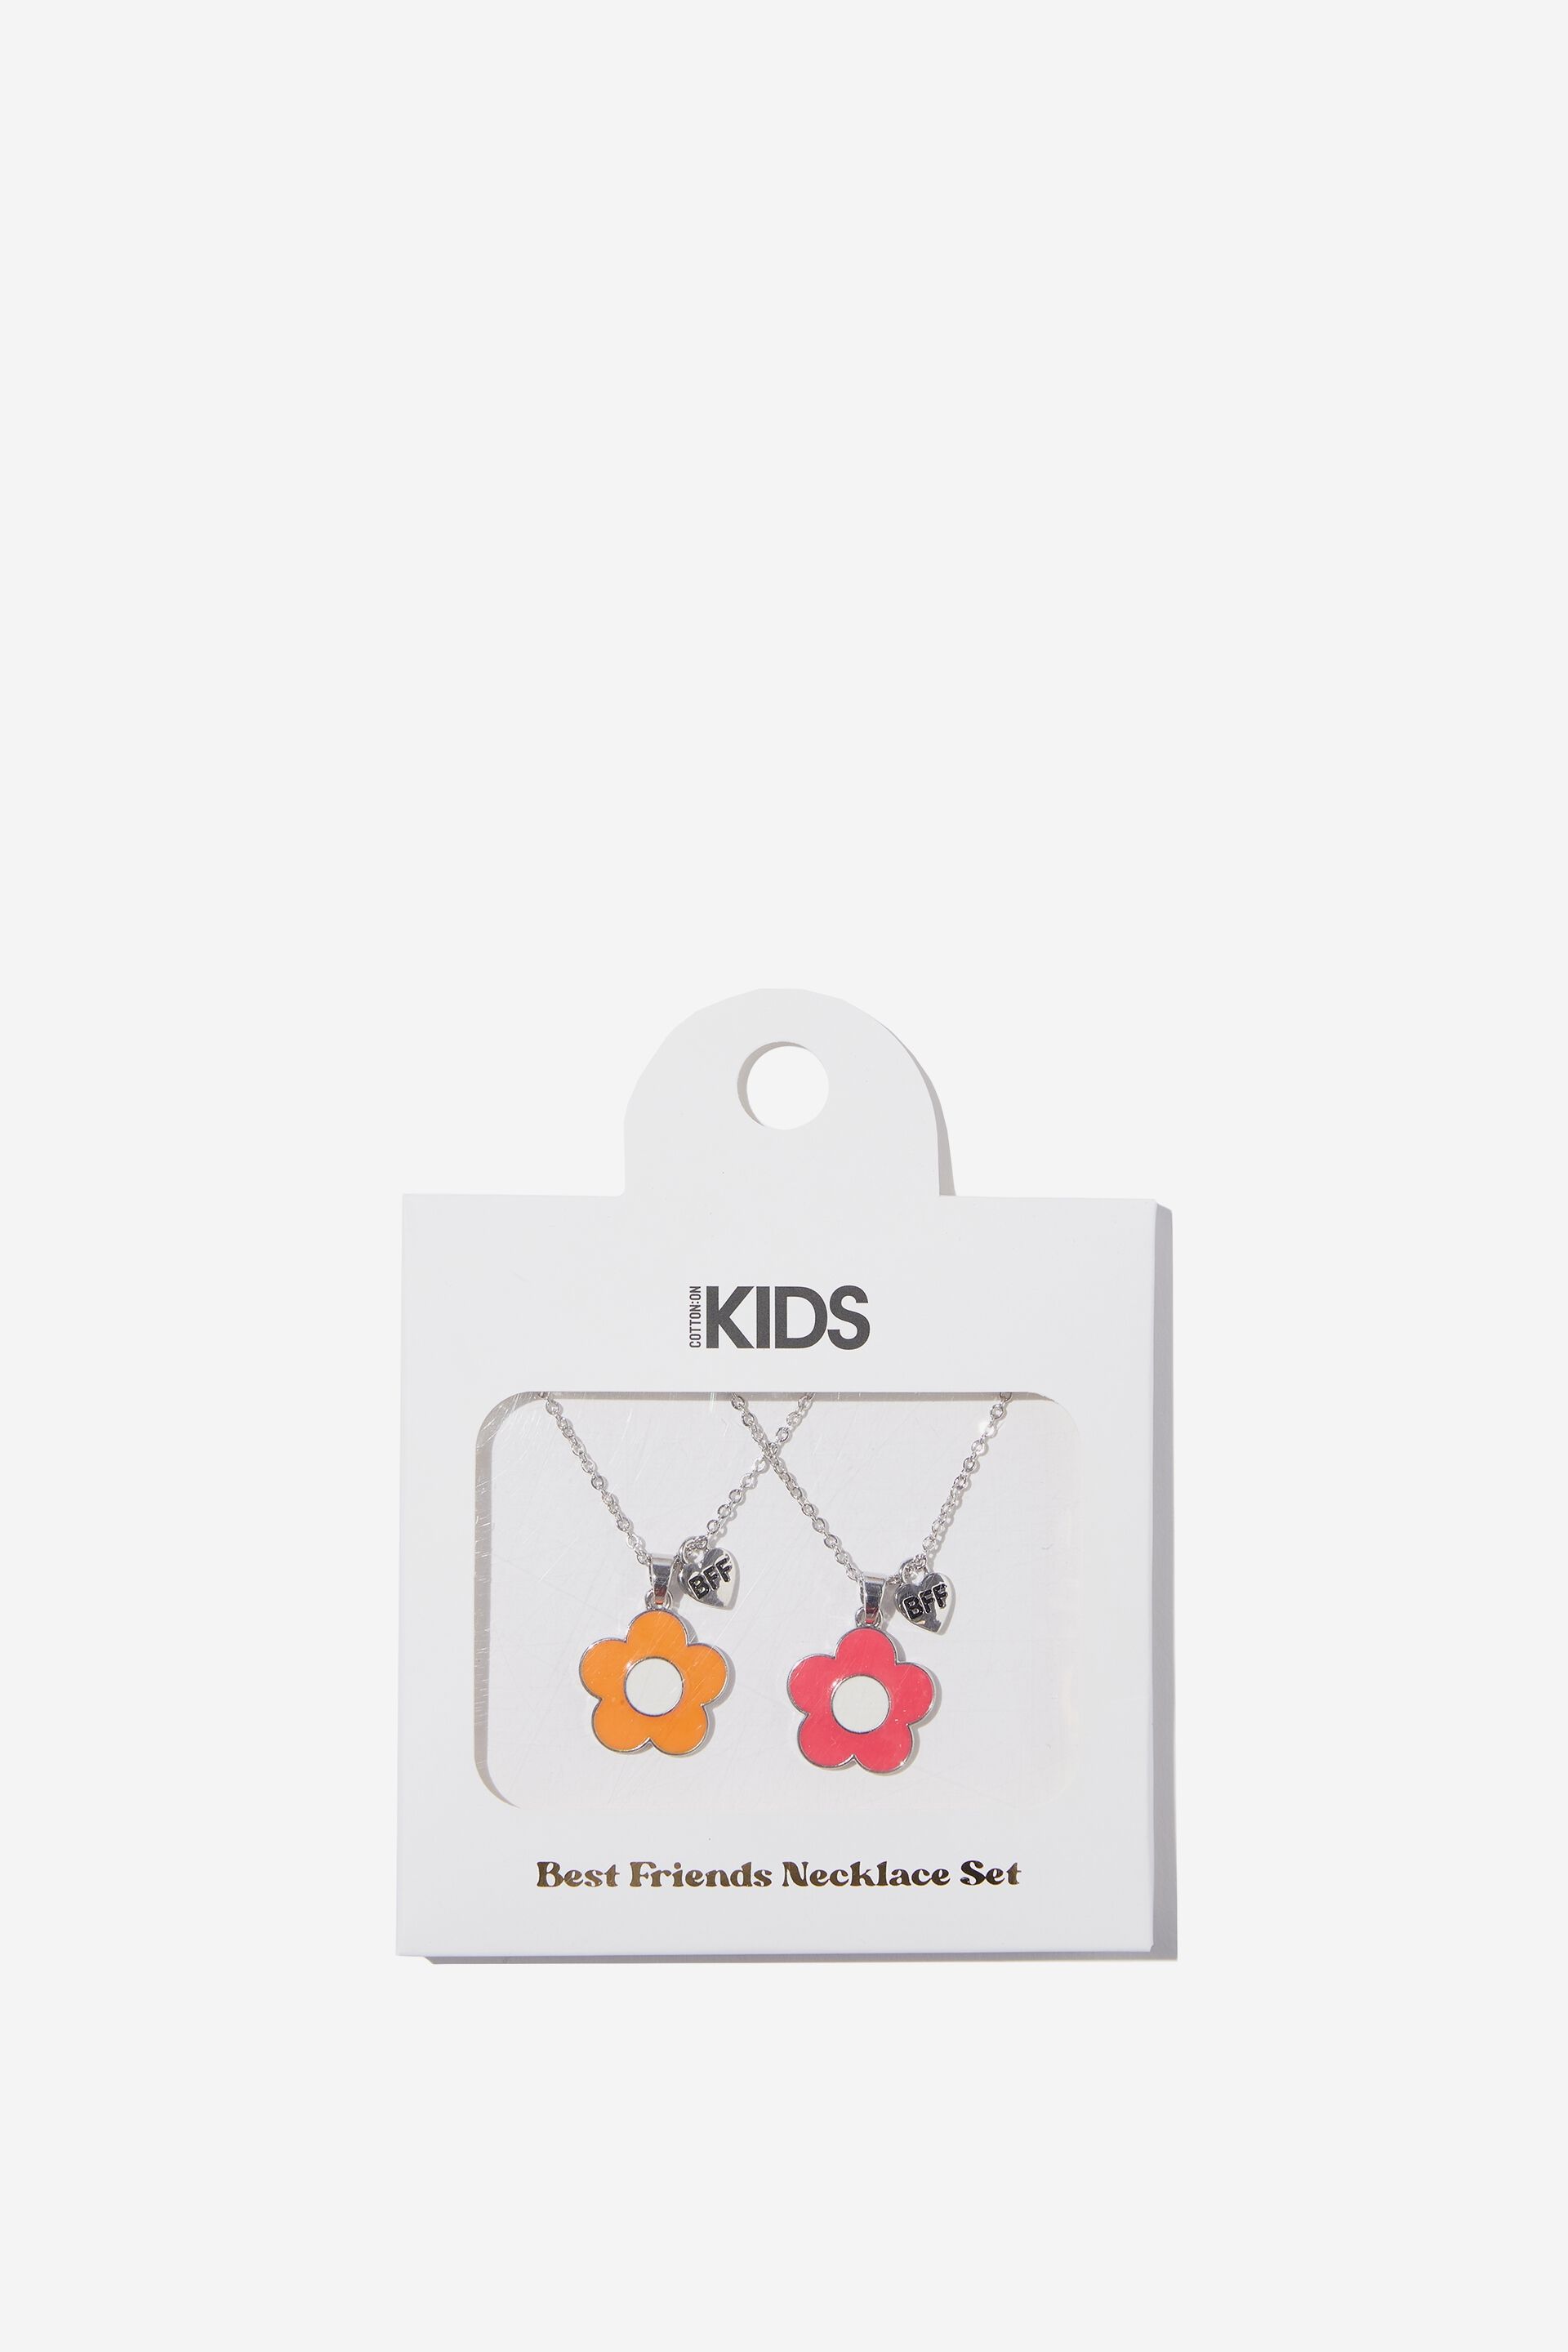 SkyWiseWin BFF Necklace for Kids - 2 Packs Best Friend Necklace Set for  Childrens Girls (BFF Necklace 2) in Kenya | Whizz Pendants